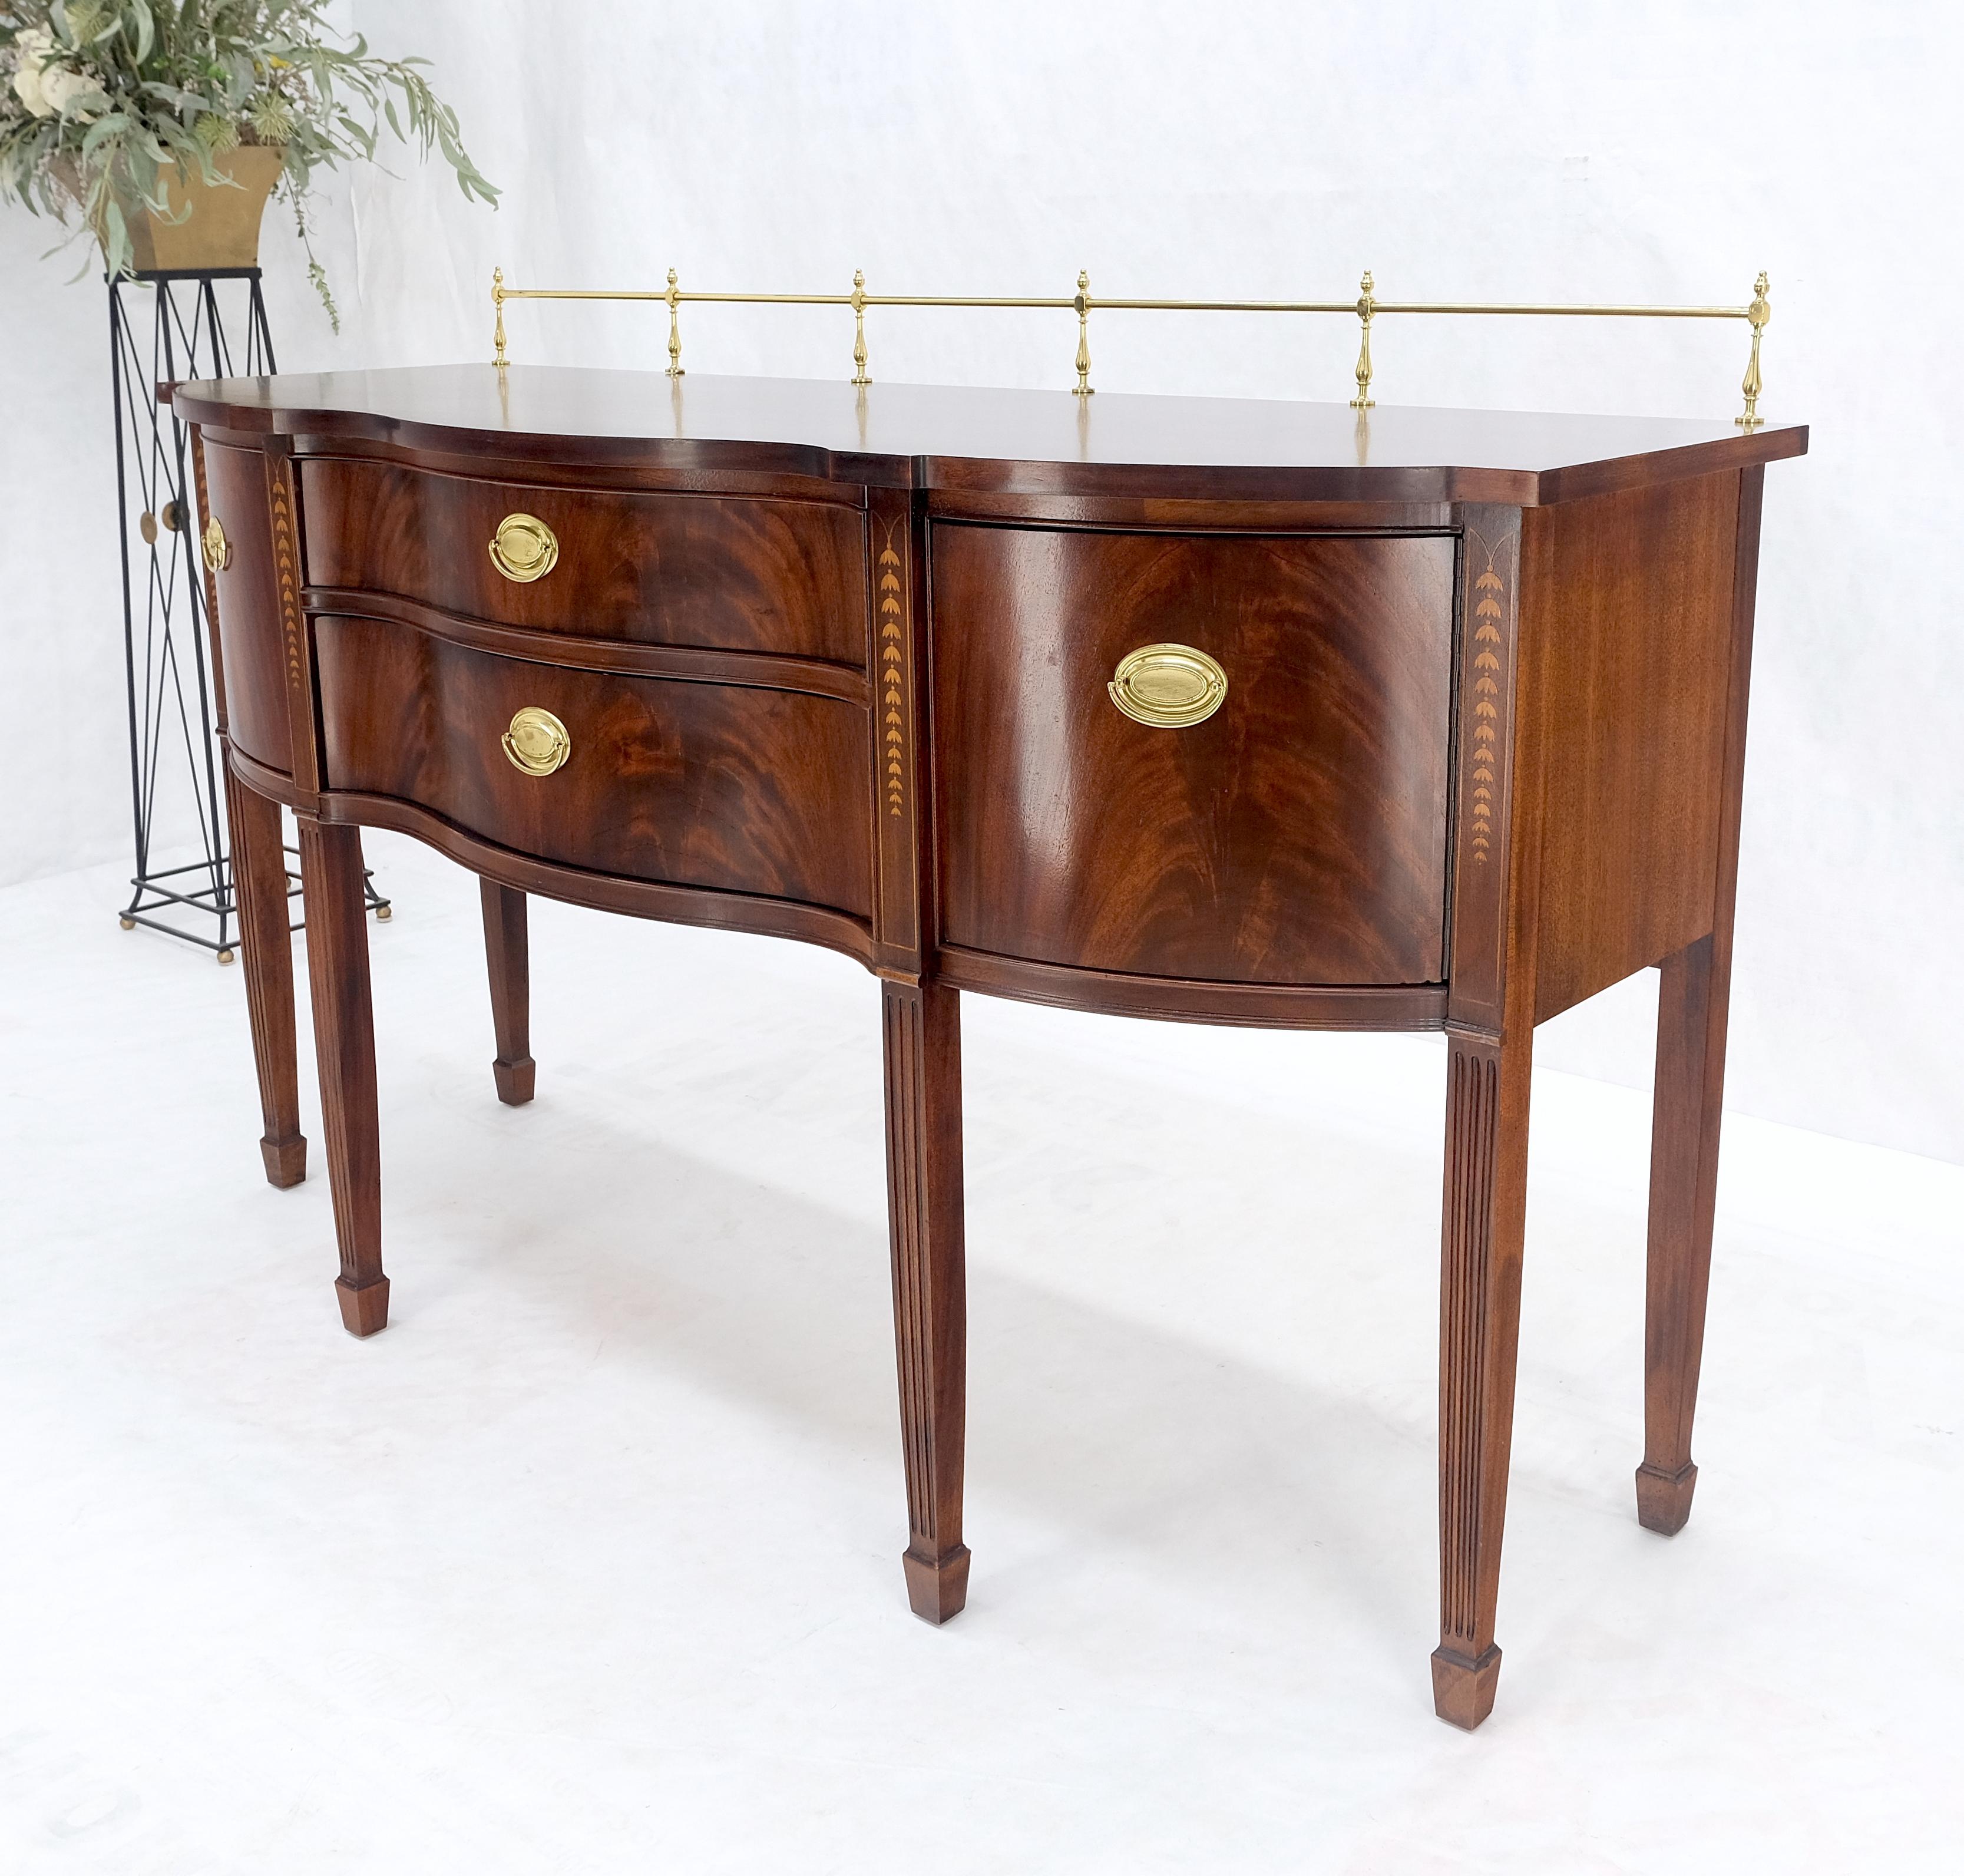 20ième siècle MINT Brass Gallery Crotch Mahogany Serpentine Front Federal Sideboard Thomasvill en vente